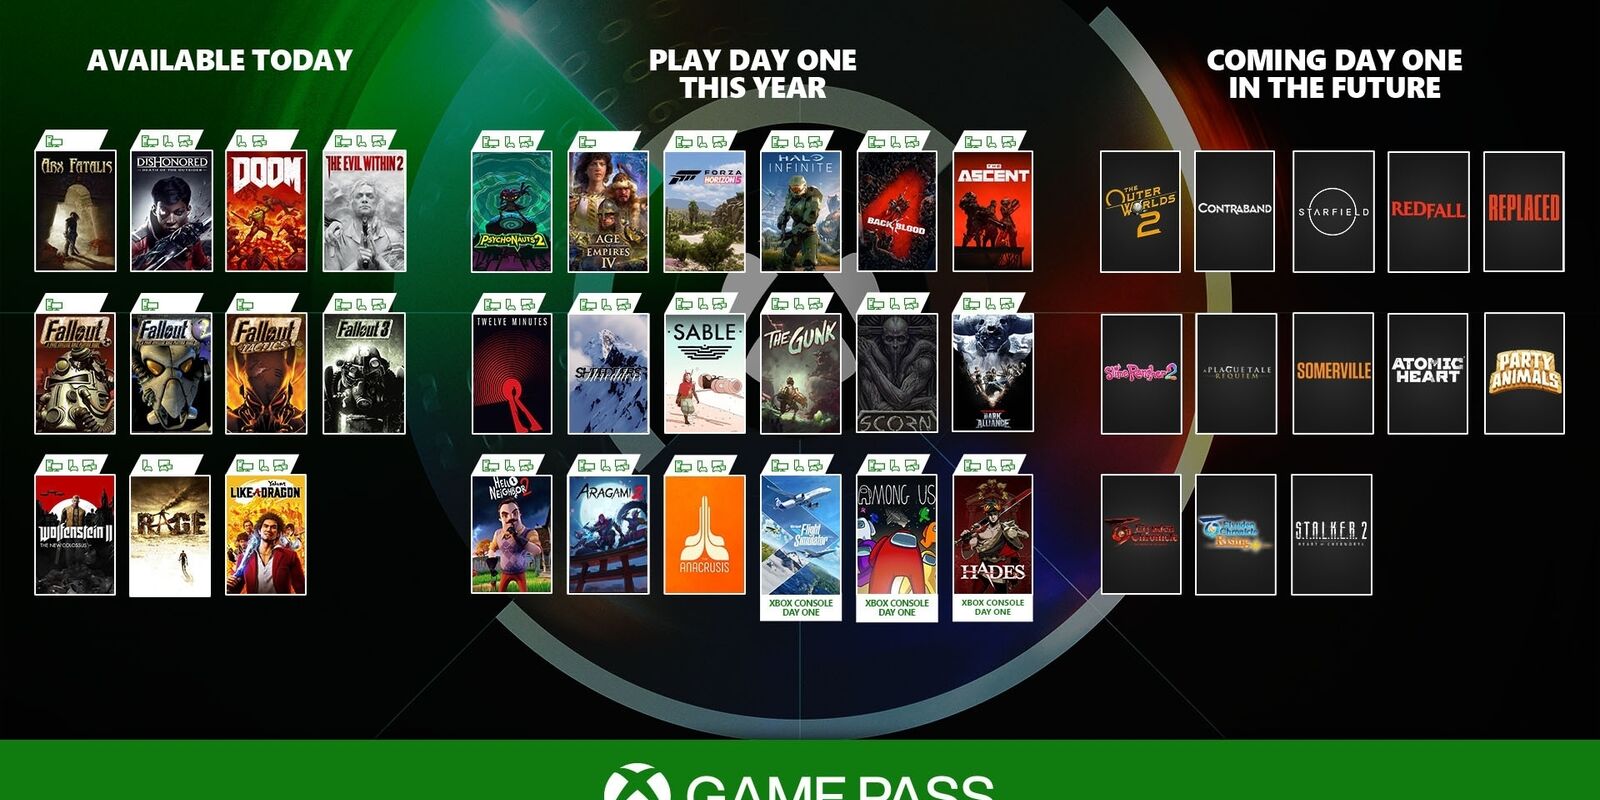 Microsofts Impressive List Of Xbox Game Pass Games Just Got Even Better 1623611169053 